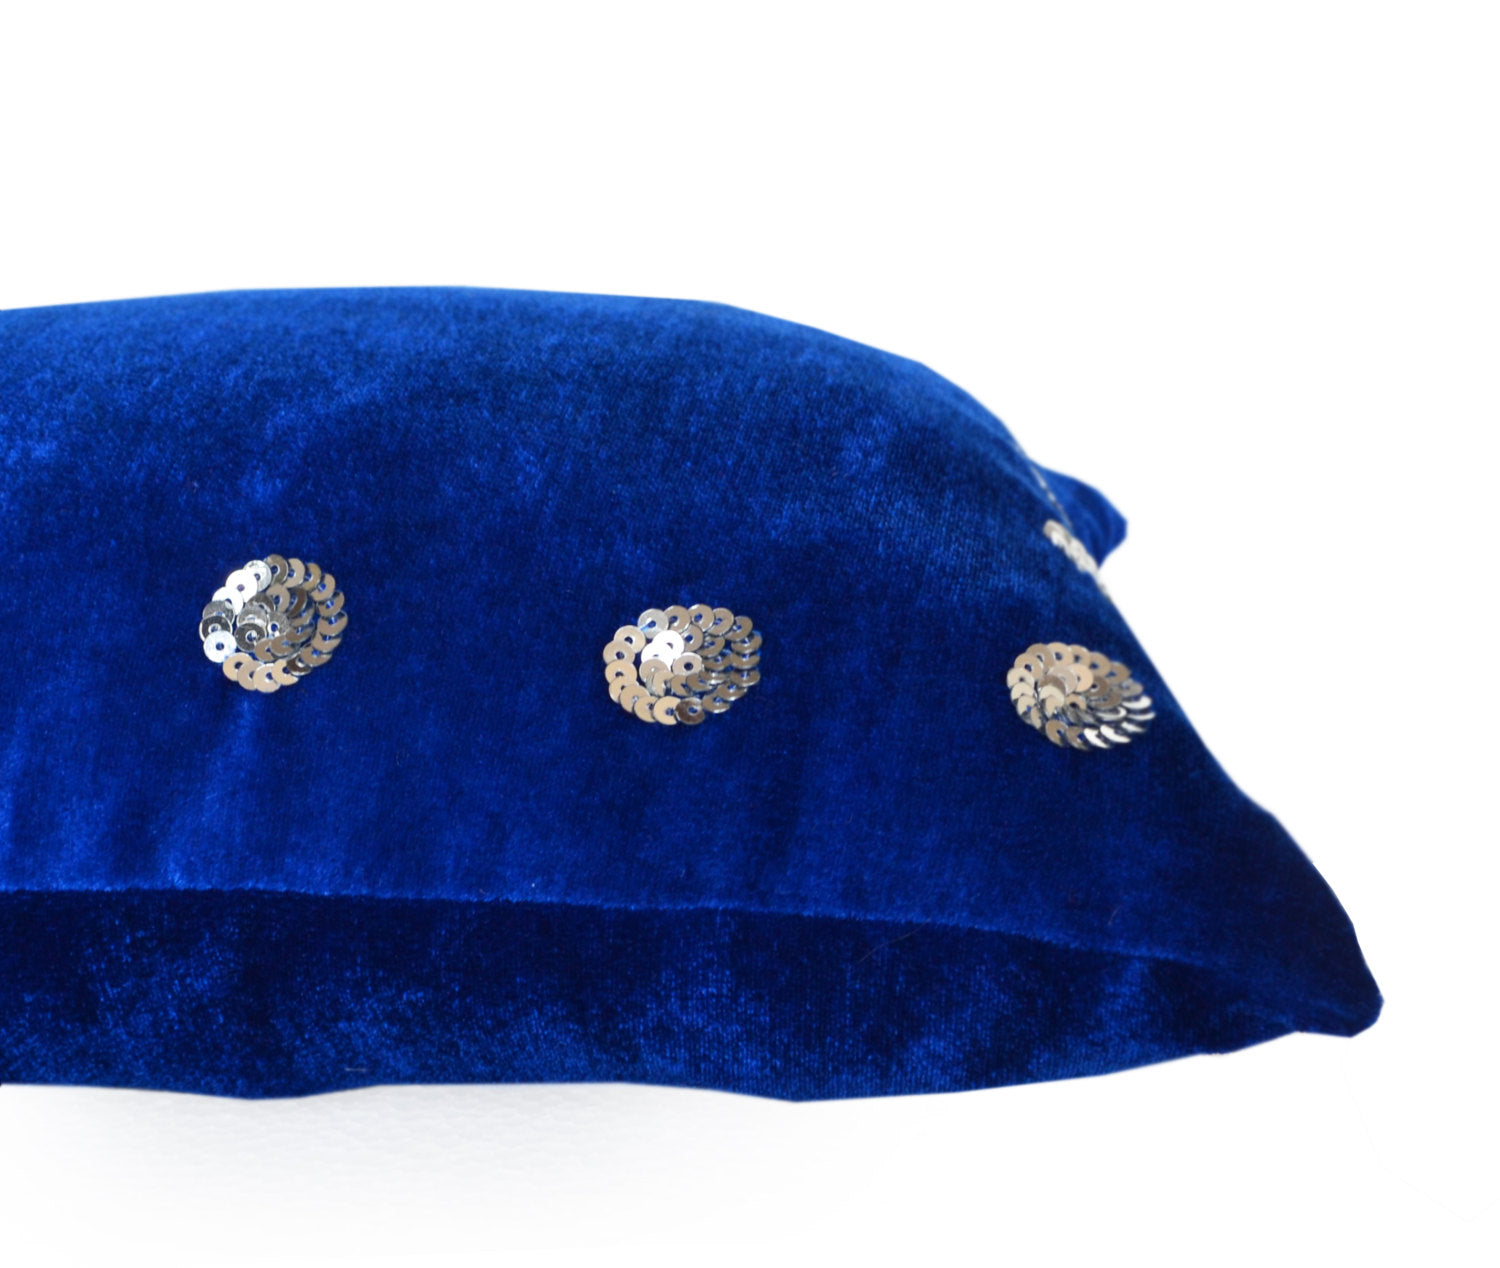 Amore Beaute Royal blue pillow in velvet with silver sequin detail.